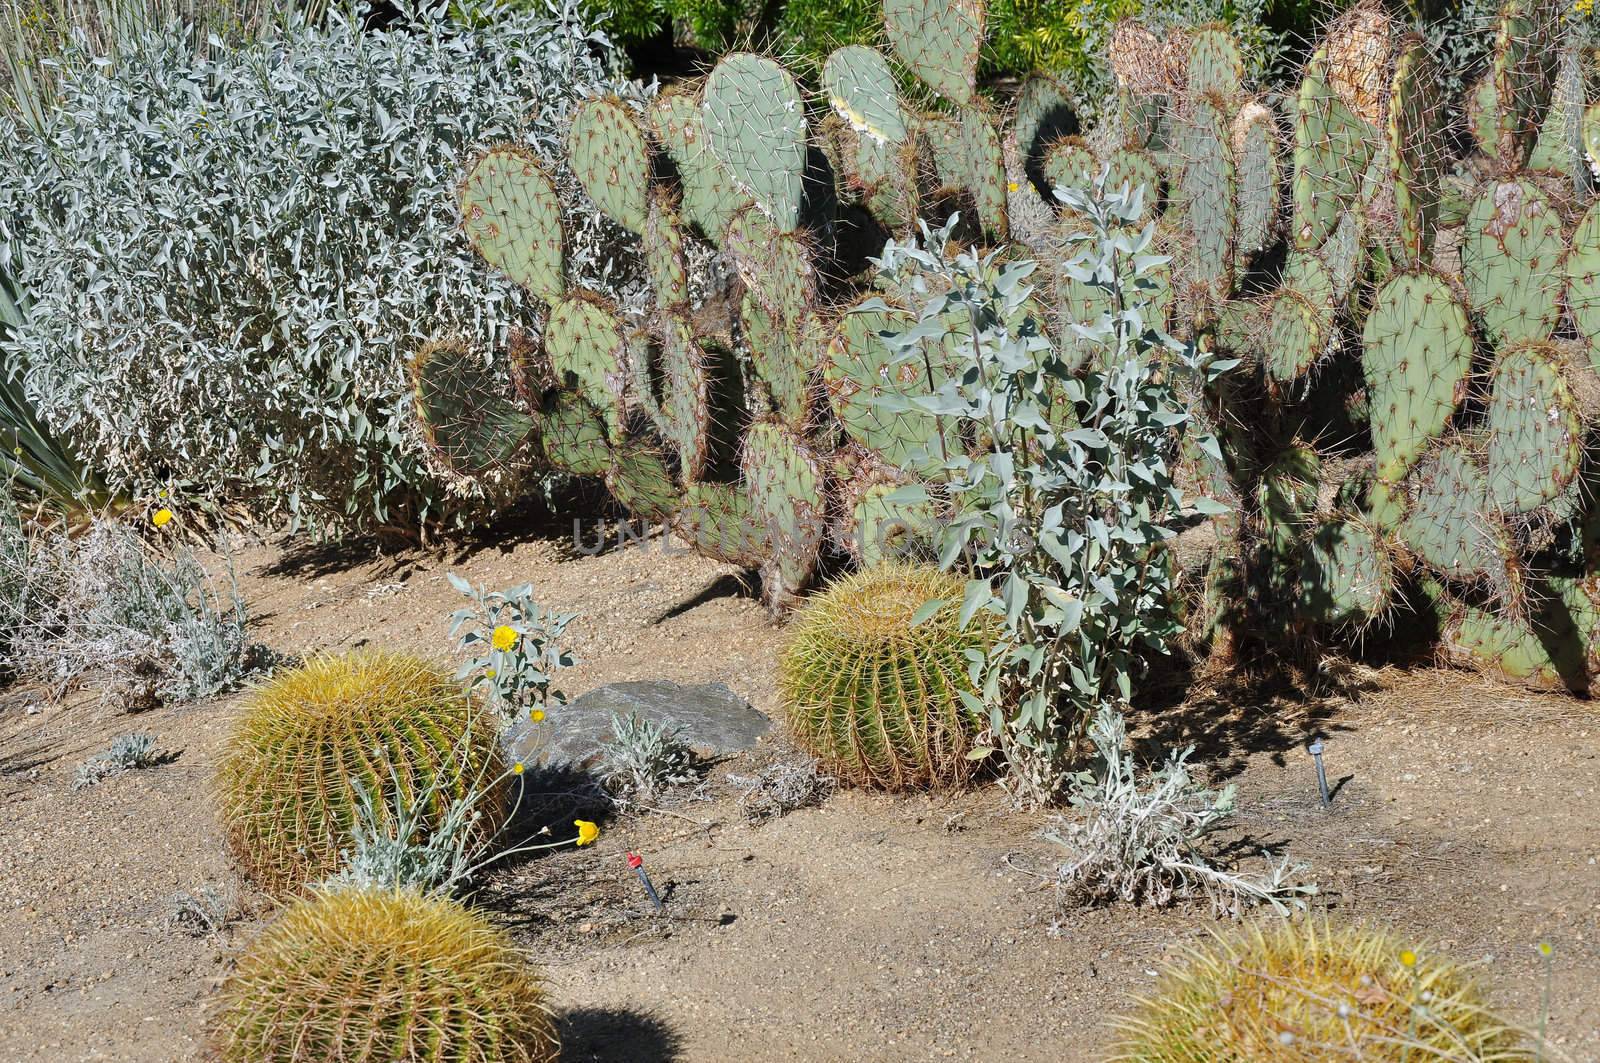 A variety of cactus can be found covering the desert landscape near Palm Springs, California.